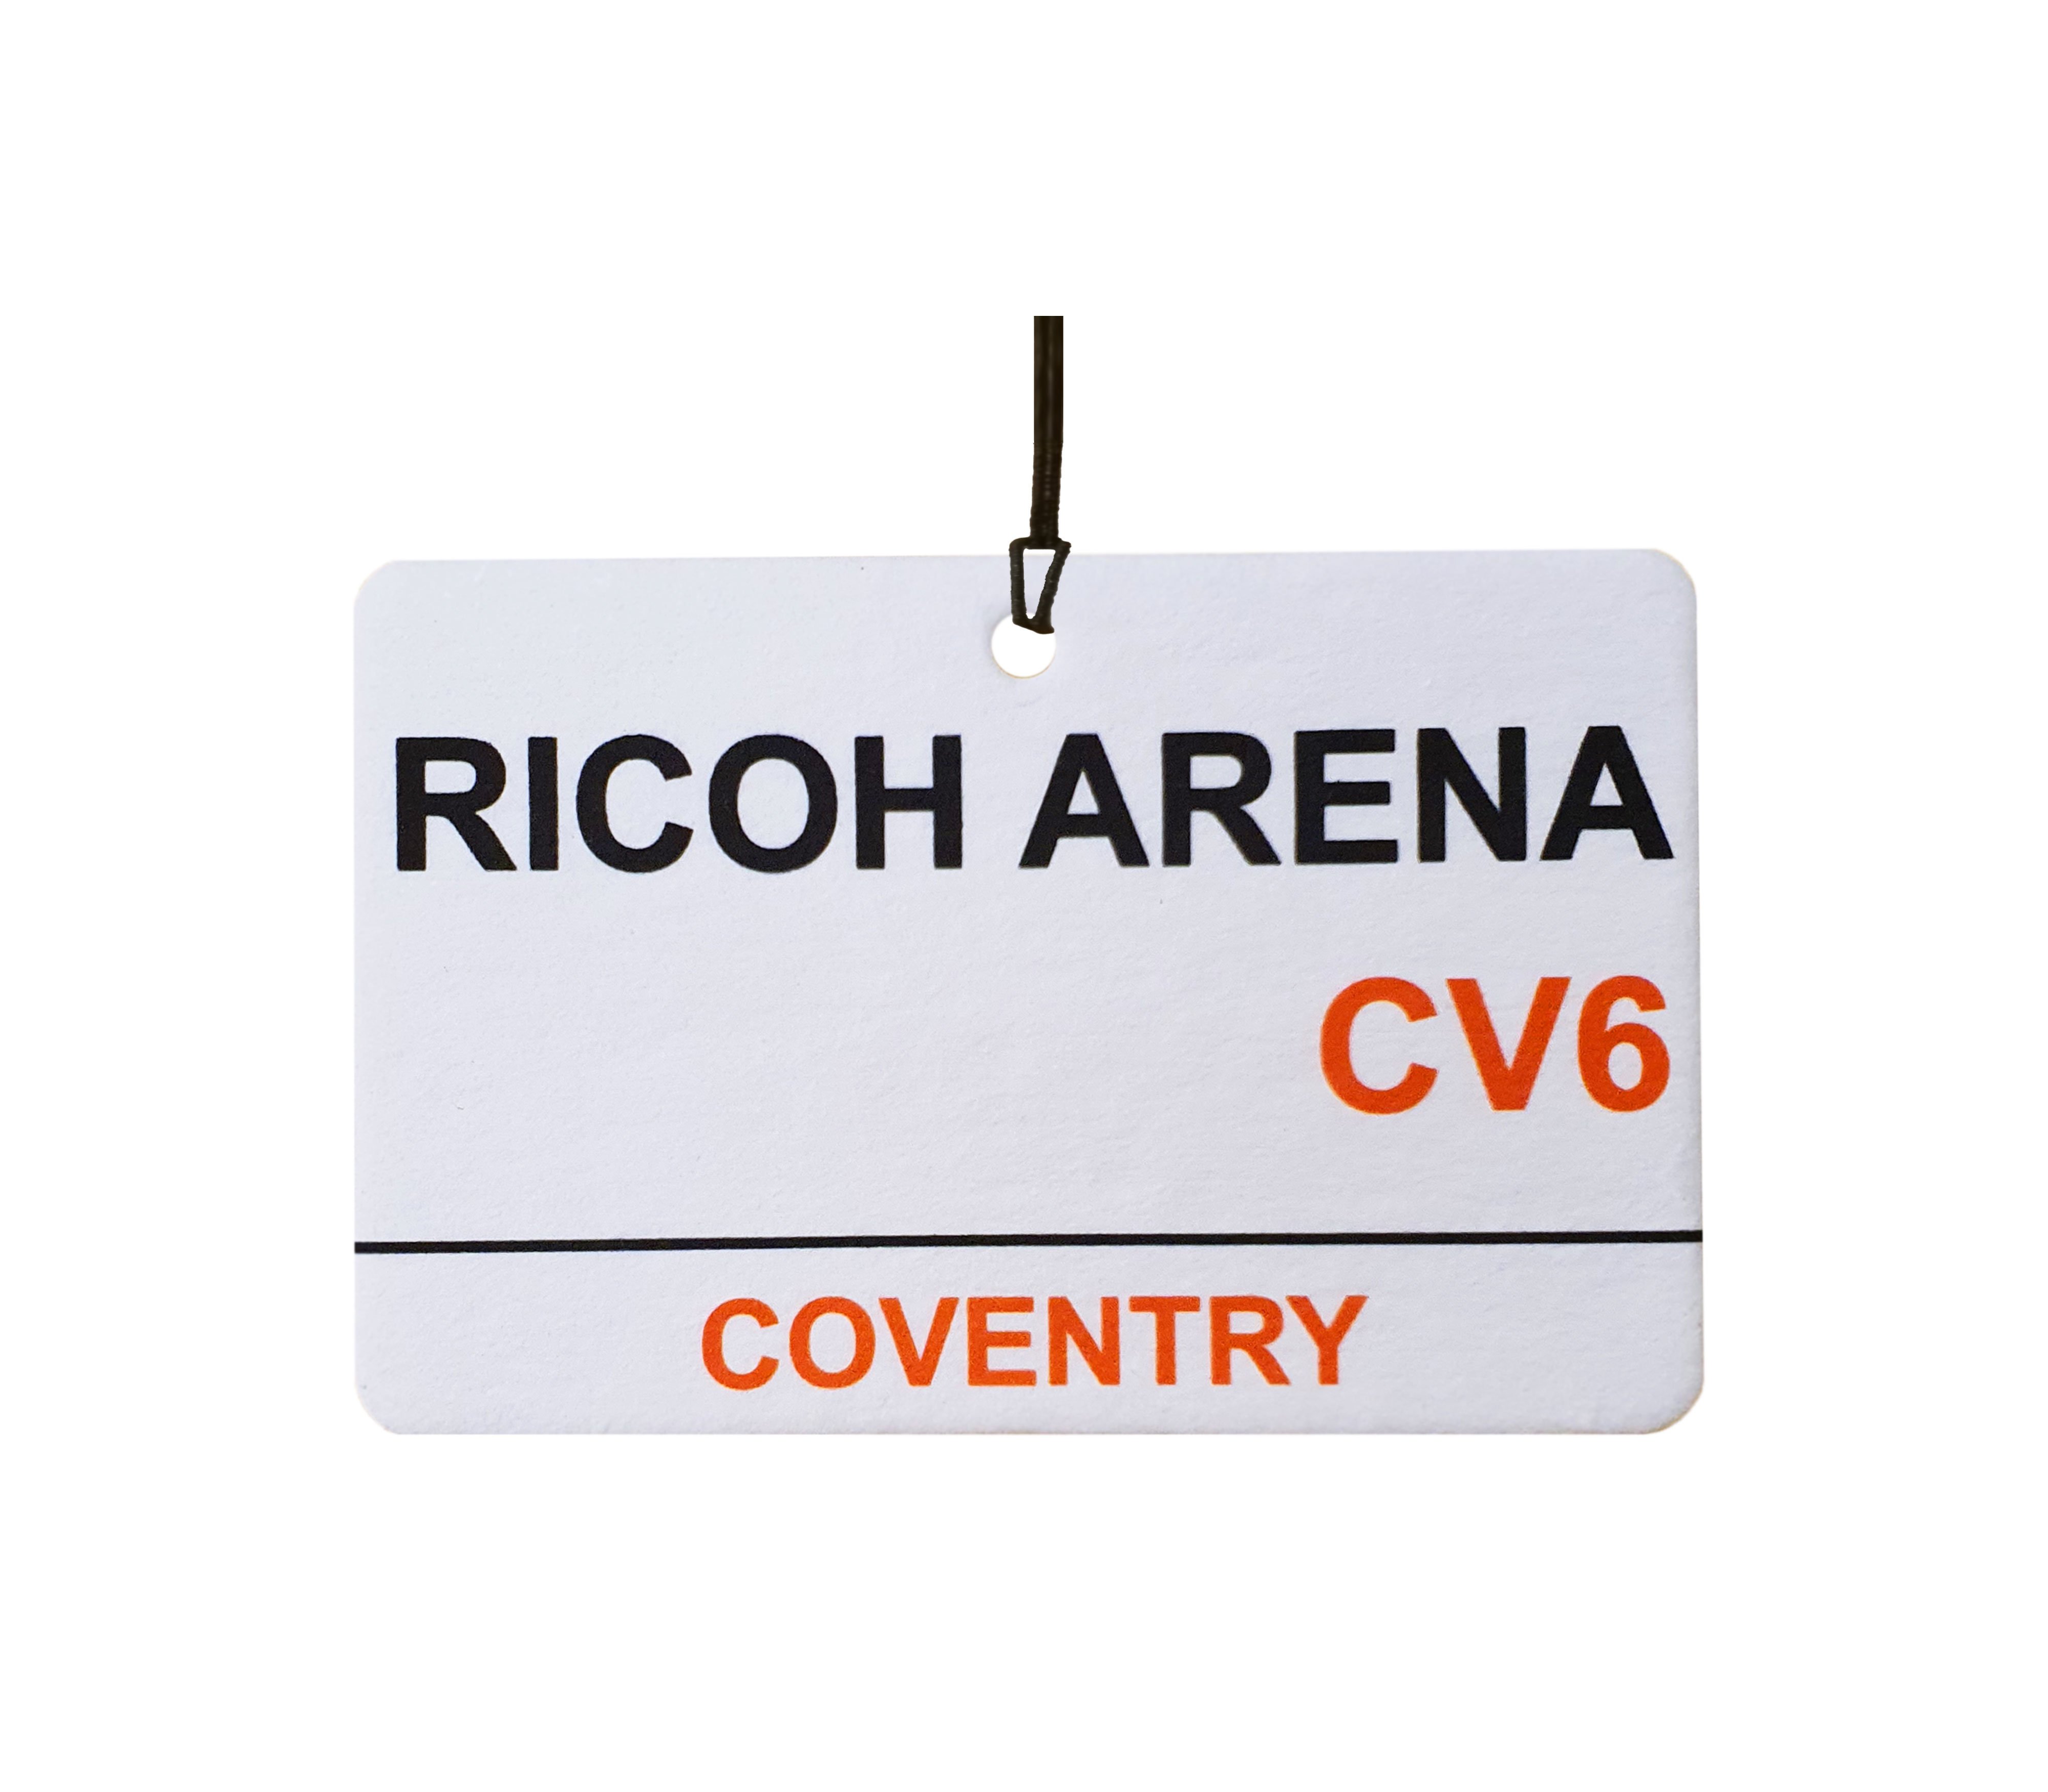 Coventry / Ricoh Arena Street Sign